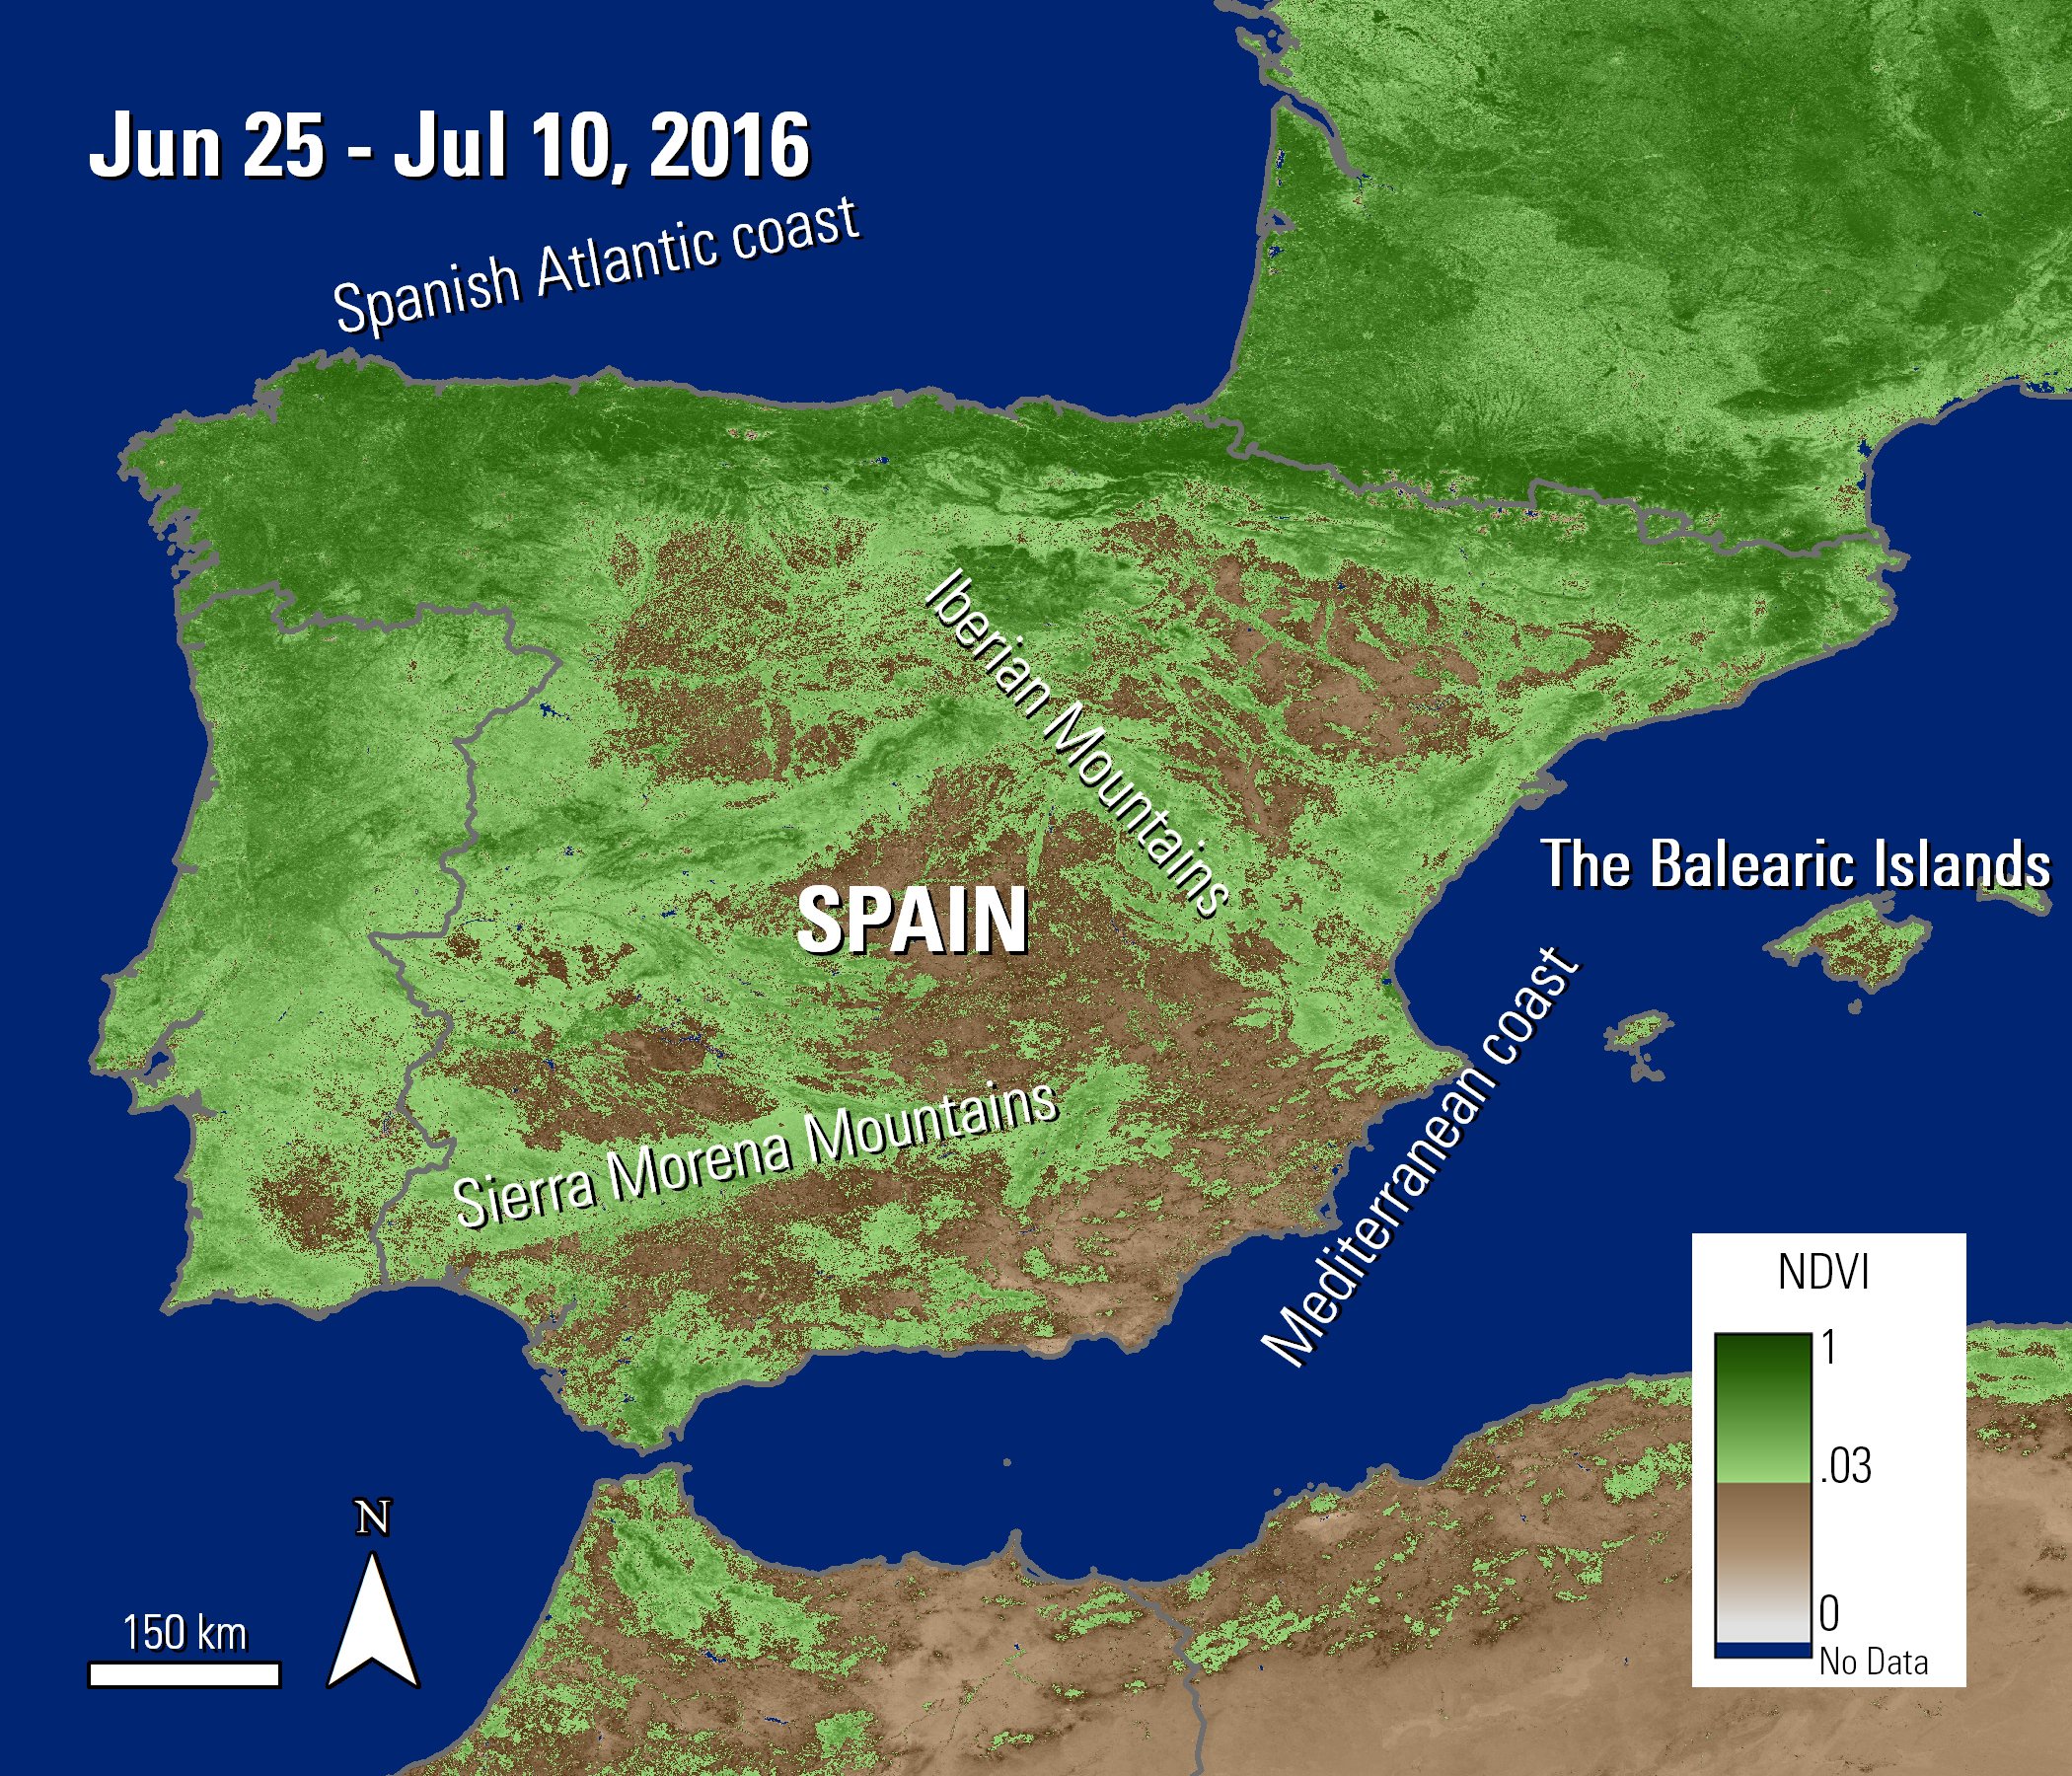 The MODIS NDVI layer over Spain and the Balearic Islands. Vegetation is shown in various shades from brown to dark green. Areas in north and western Spain are show as green, where as areas in southern and East Spain are more brown.